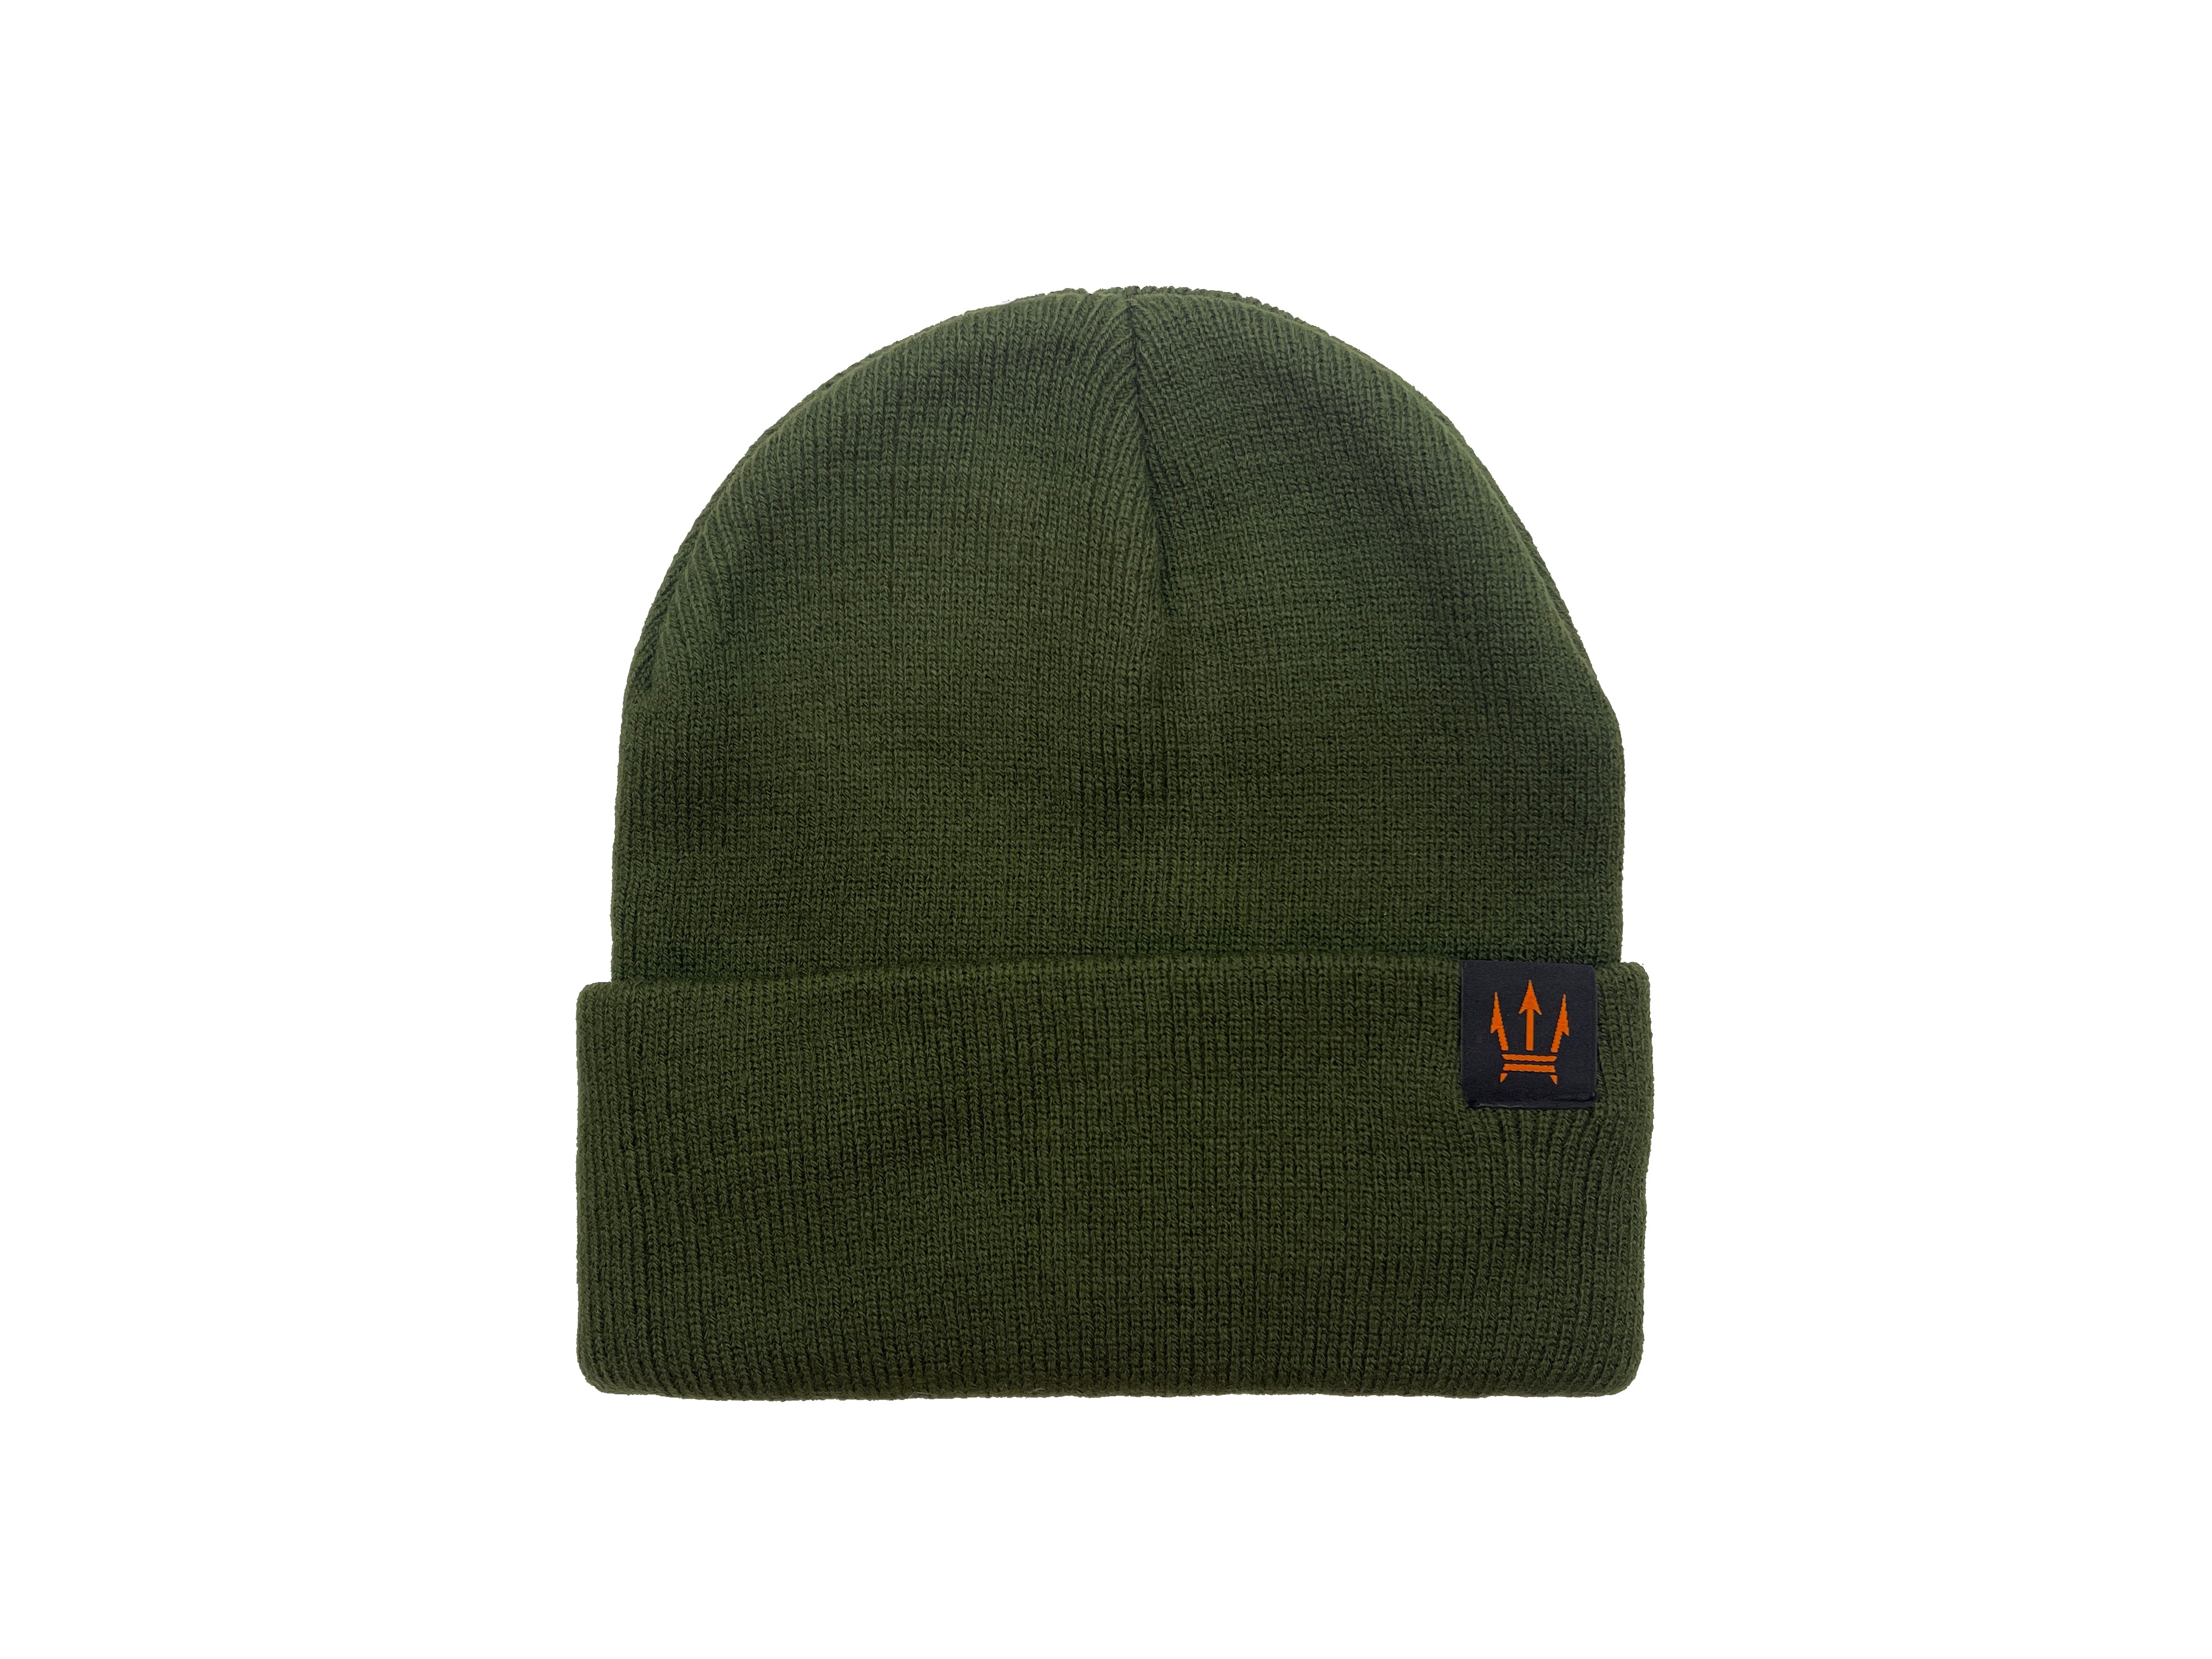 Isotherm - Trident Knit Beanie by Maratac® – CountyComm